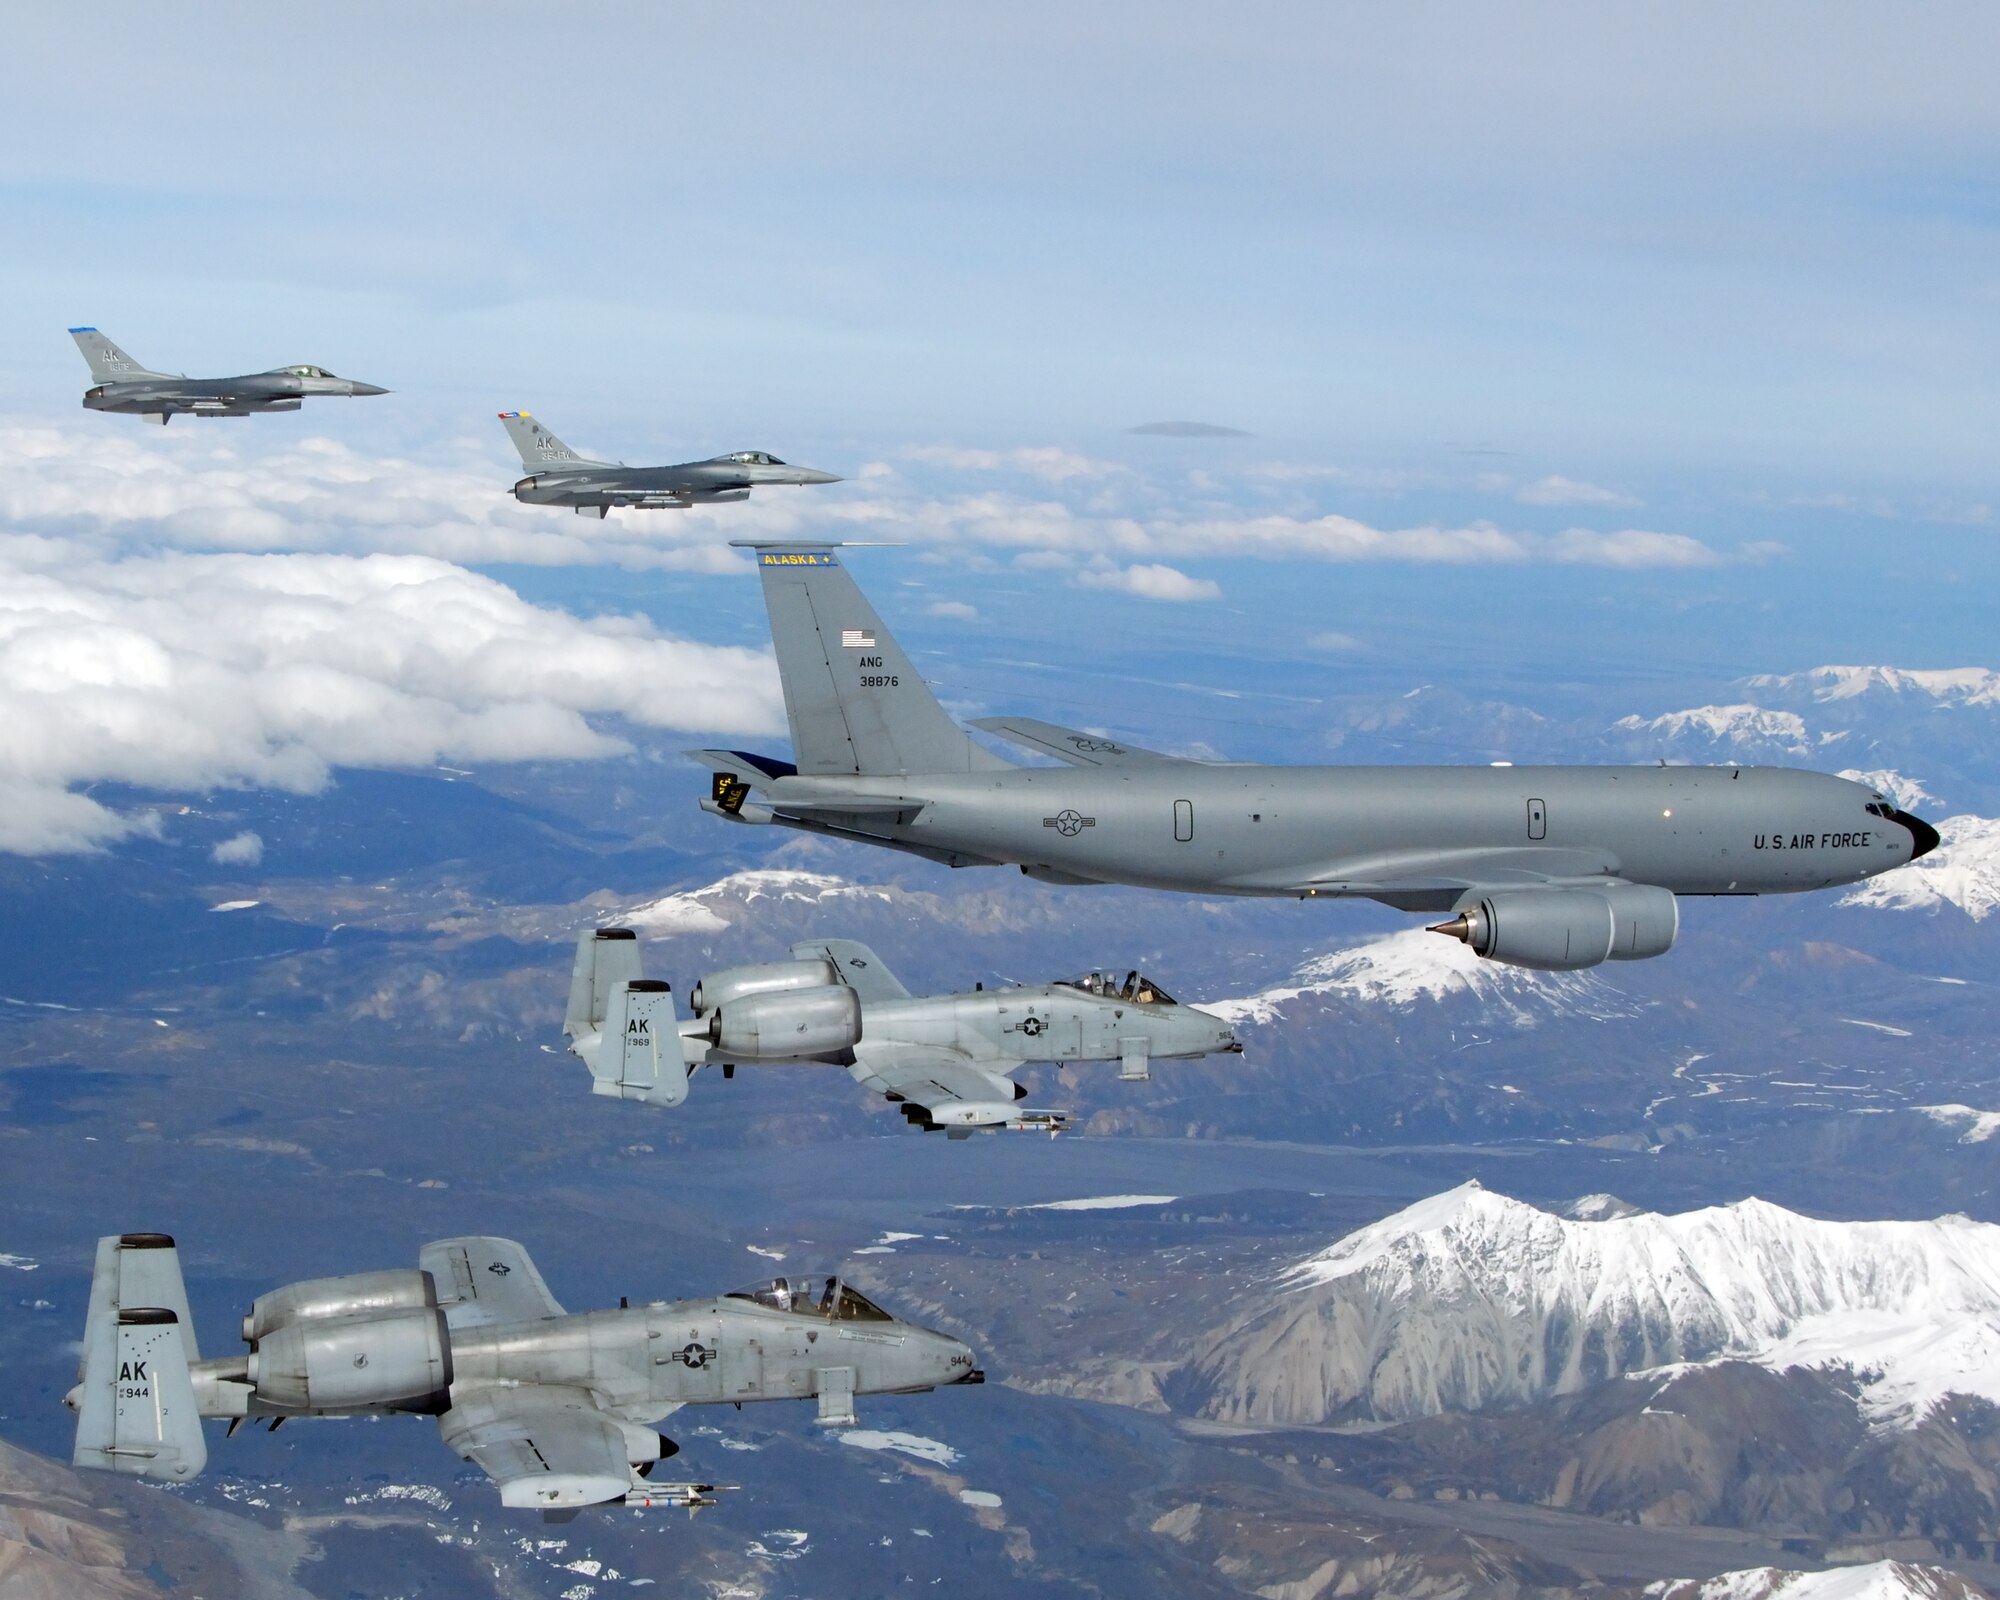 EIELSON AIR FORCE BASE, Alaska -- A KC-135R Stratotanker, 168th Air Refueling Wing, Alaska Air National Guard, flies in formation with two F-16 Fighting Falcons from the 18th Fighter Squadron, and two A-10 Warthog II's from the 355th Fighter Squadron on May 29, 2007.  The five aircraft assigned to Eielson flew in formation for the last time due to the deactivation of the 355th FS, and the 18th FS.  (U.S. Air Force photo by Master Sergeant Rob Wieland) 